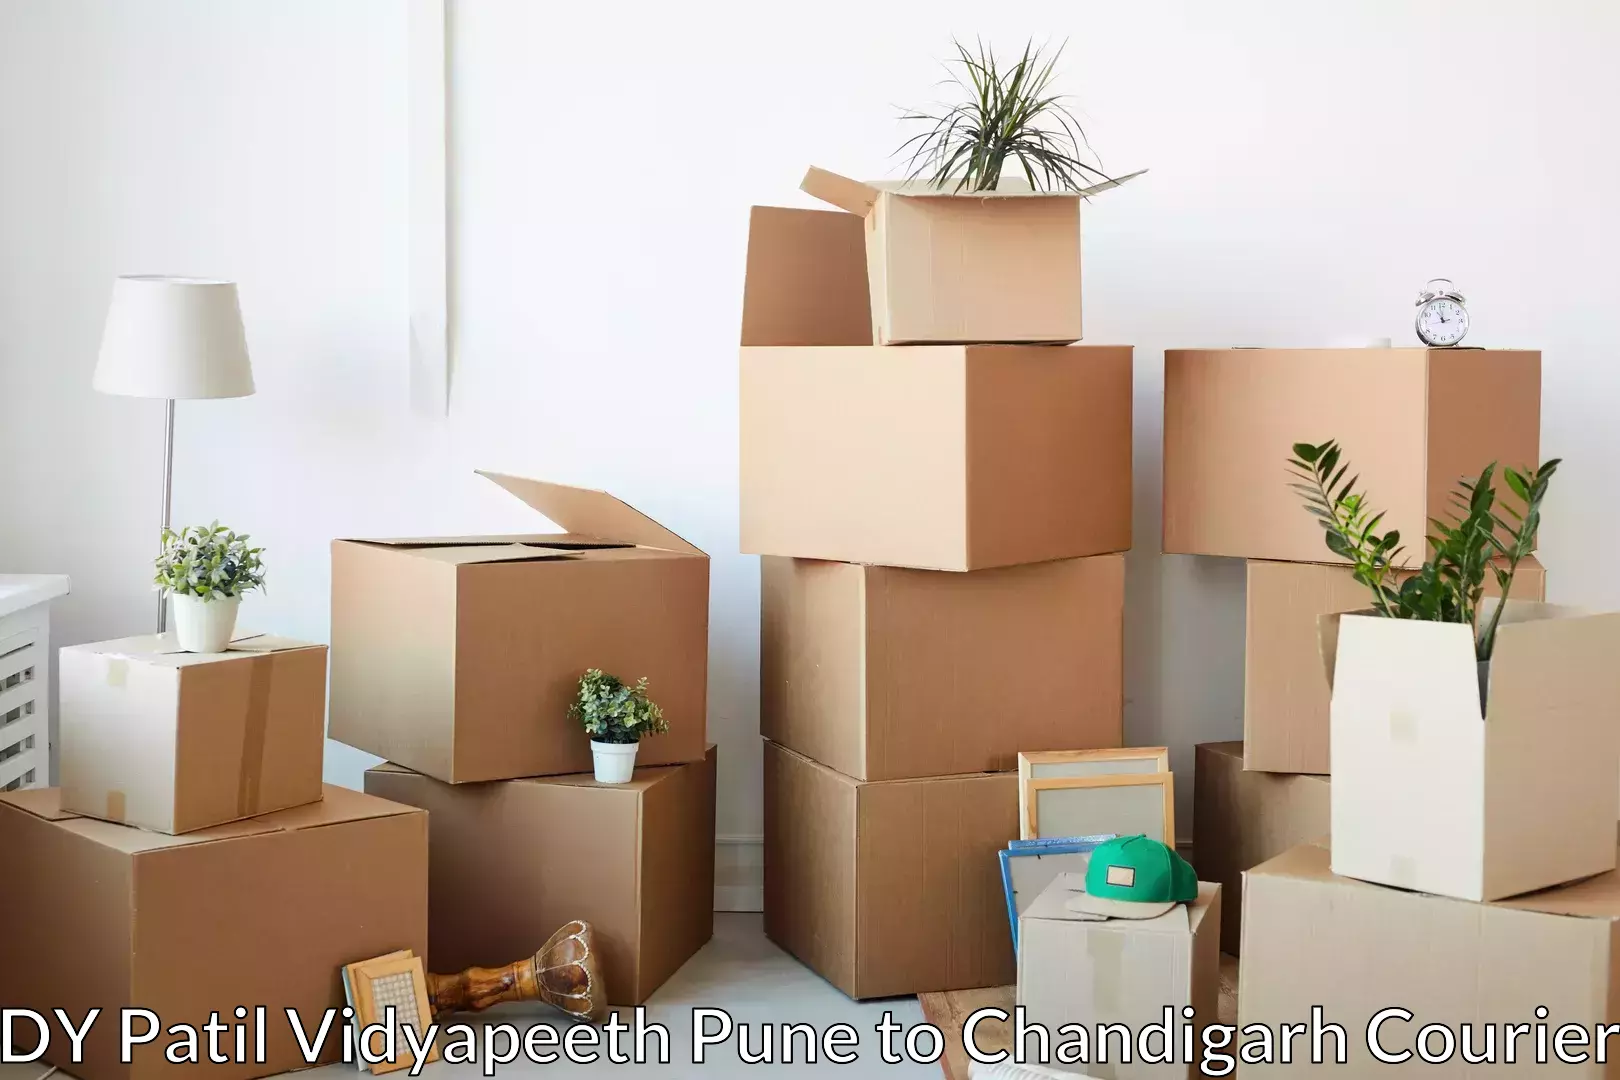 Budget-friendly movers DY Patil Vidyapeeth Pune to Chandigarh